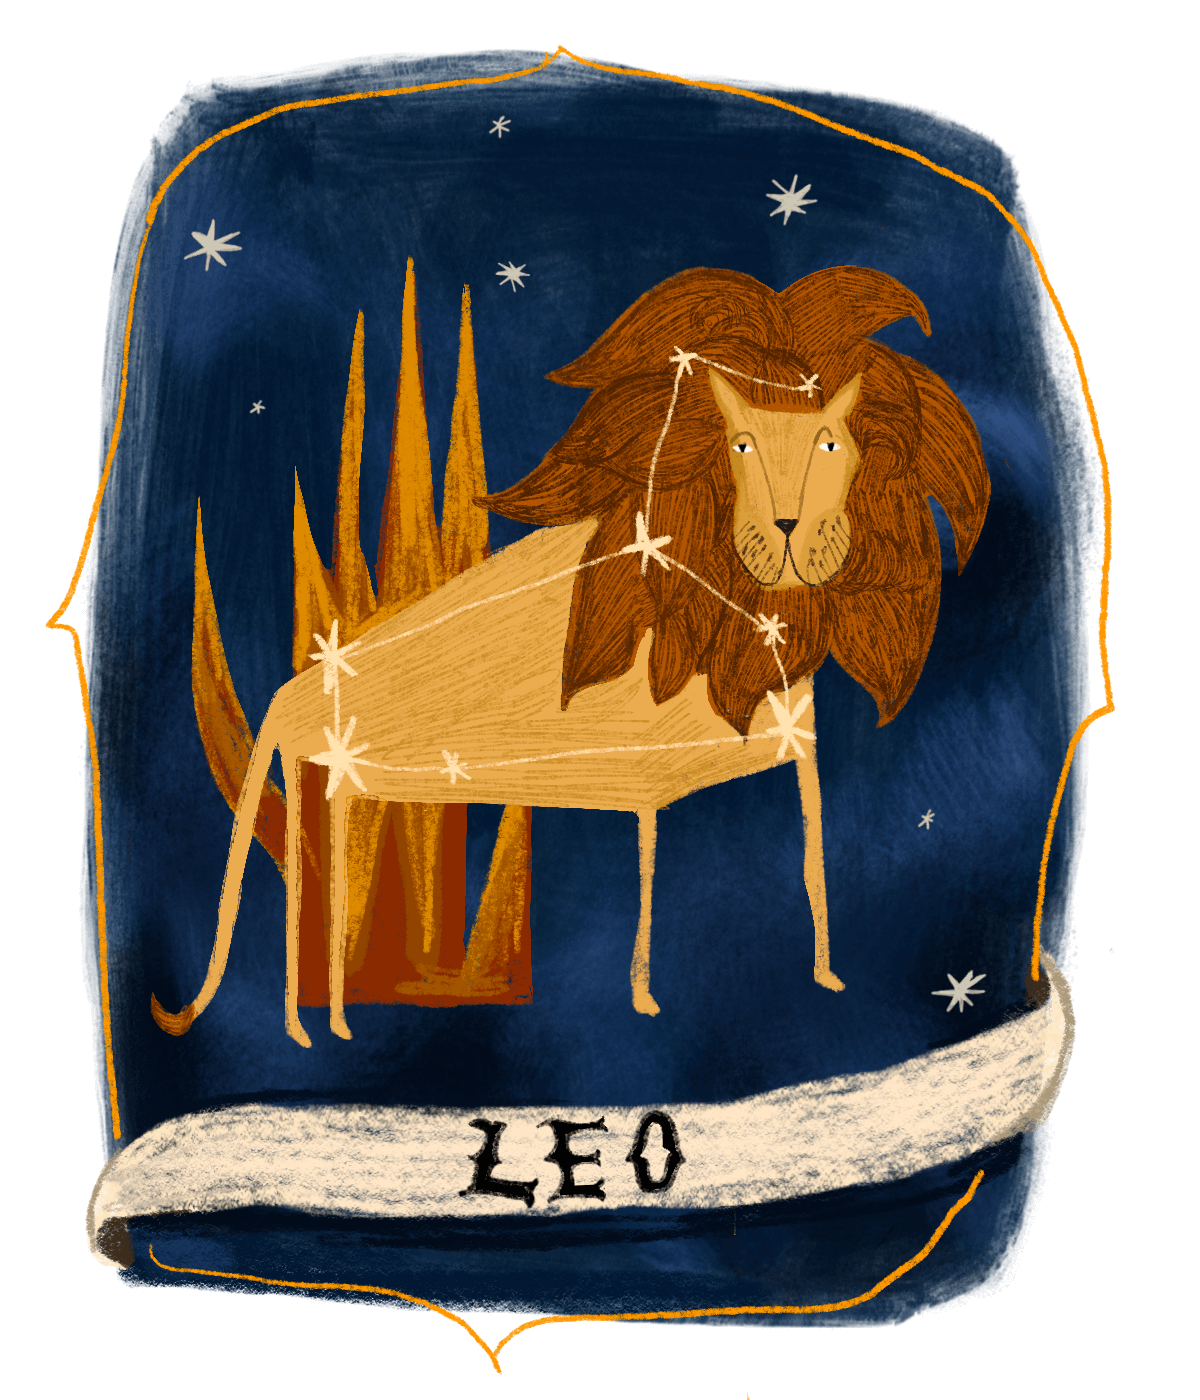 An illustration of the Leo star sign.